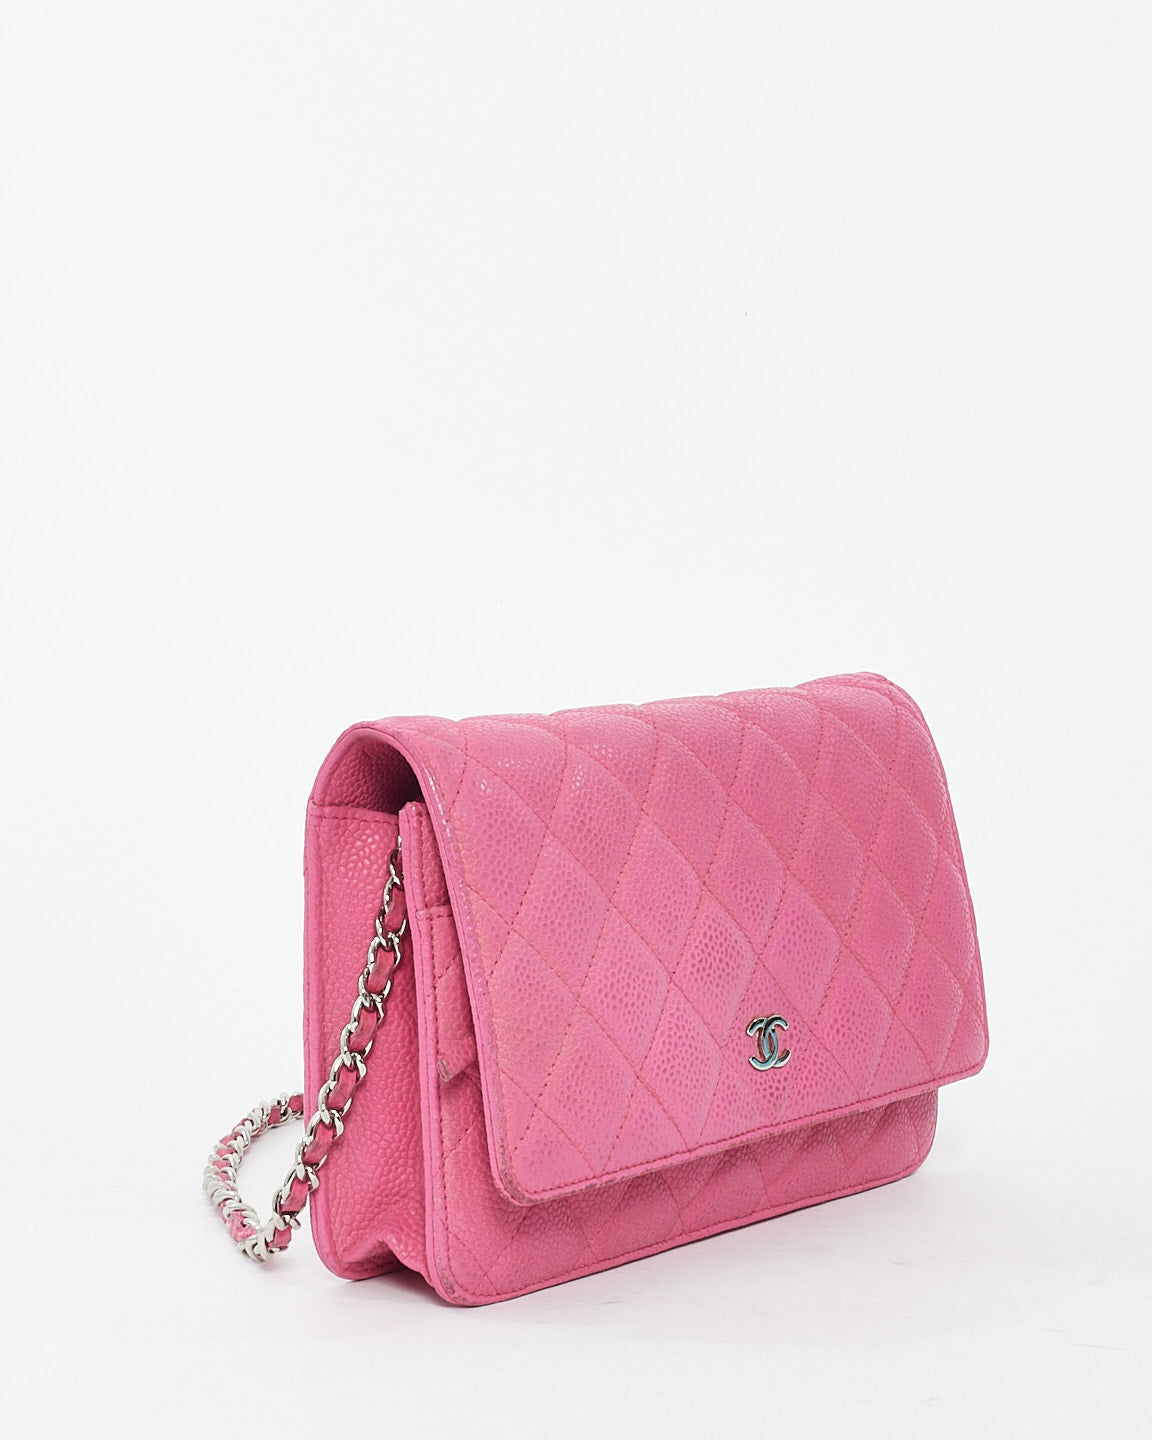 Chanel Pink Quilted Caviar Leather CC Wallet On Chain Bag